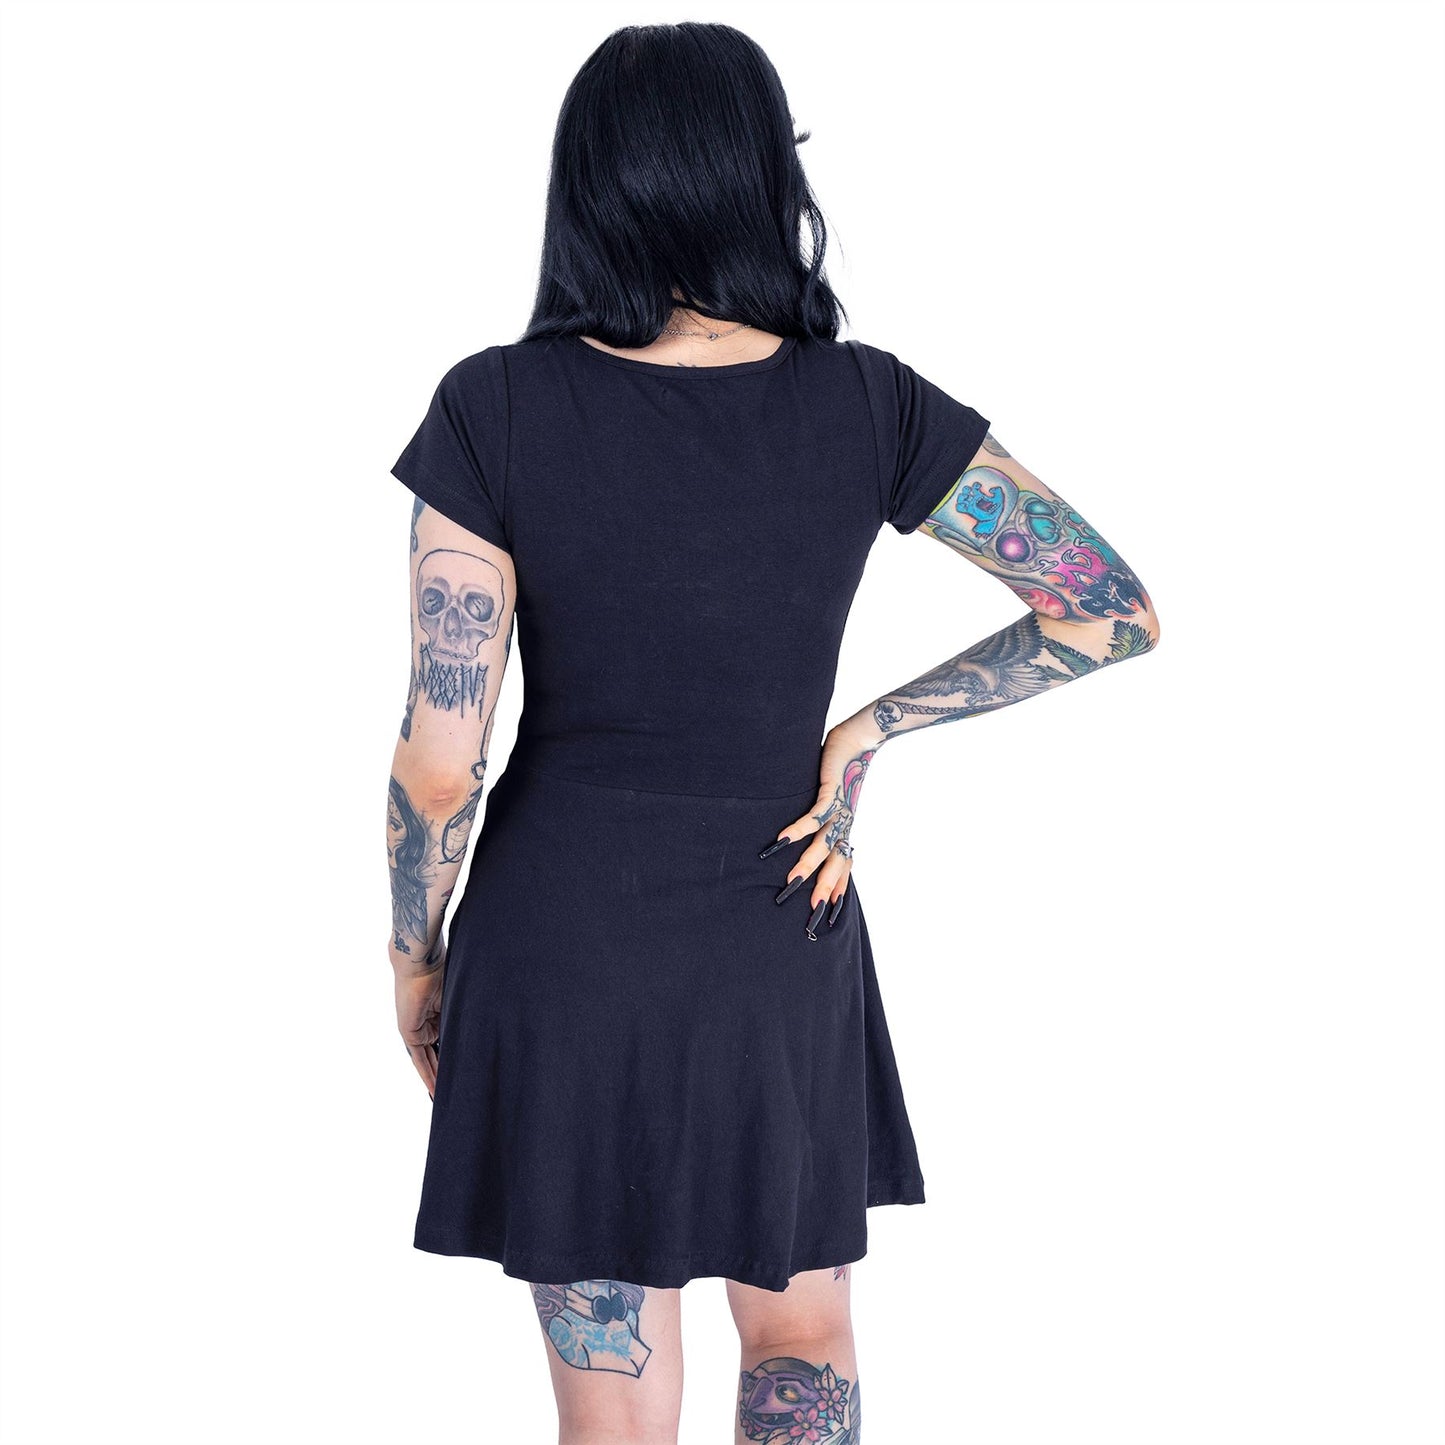 INTO THE DARKNESS DRESS - BLACK